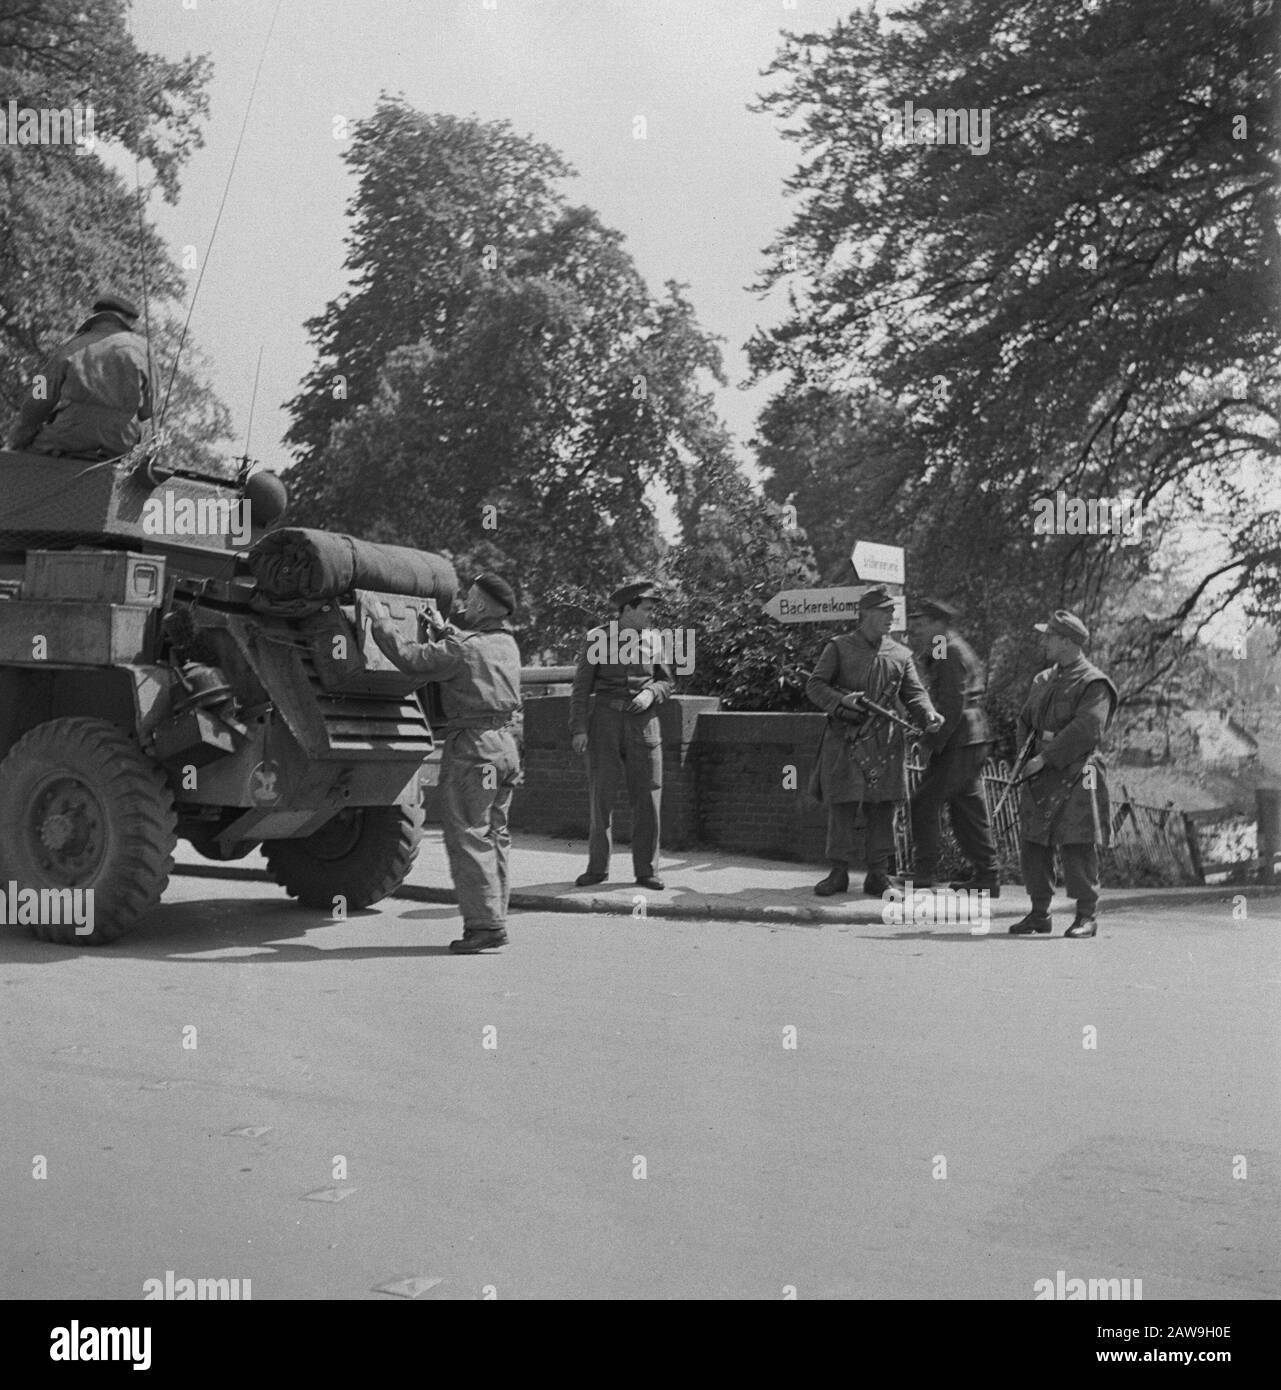 Liberation Joy: Amersfoort  Armored Car of the 49th West Riding Infantry Division on a bridge with signs in German. On the side are still armed German soldiers Date: May 7, 1945 Location: Amersfoort Keywords: Liberation, World War II Stock Photo